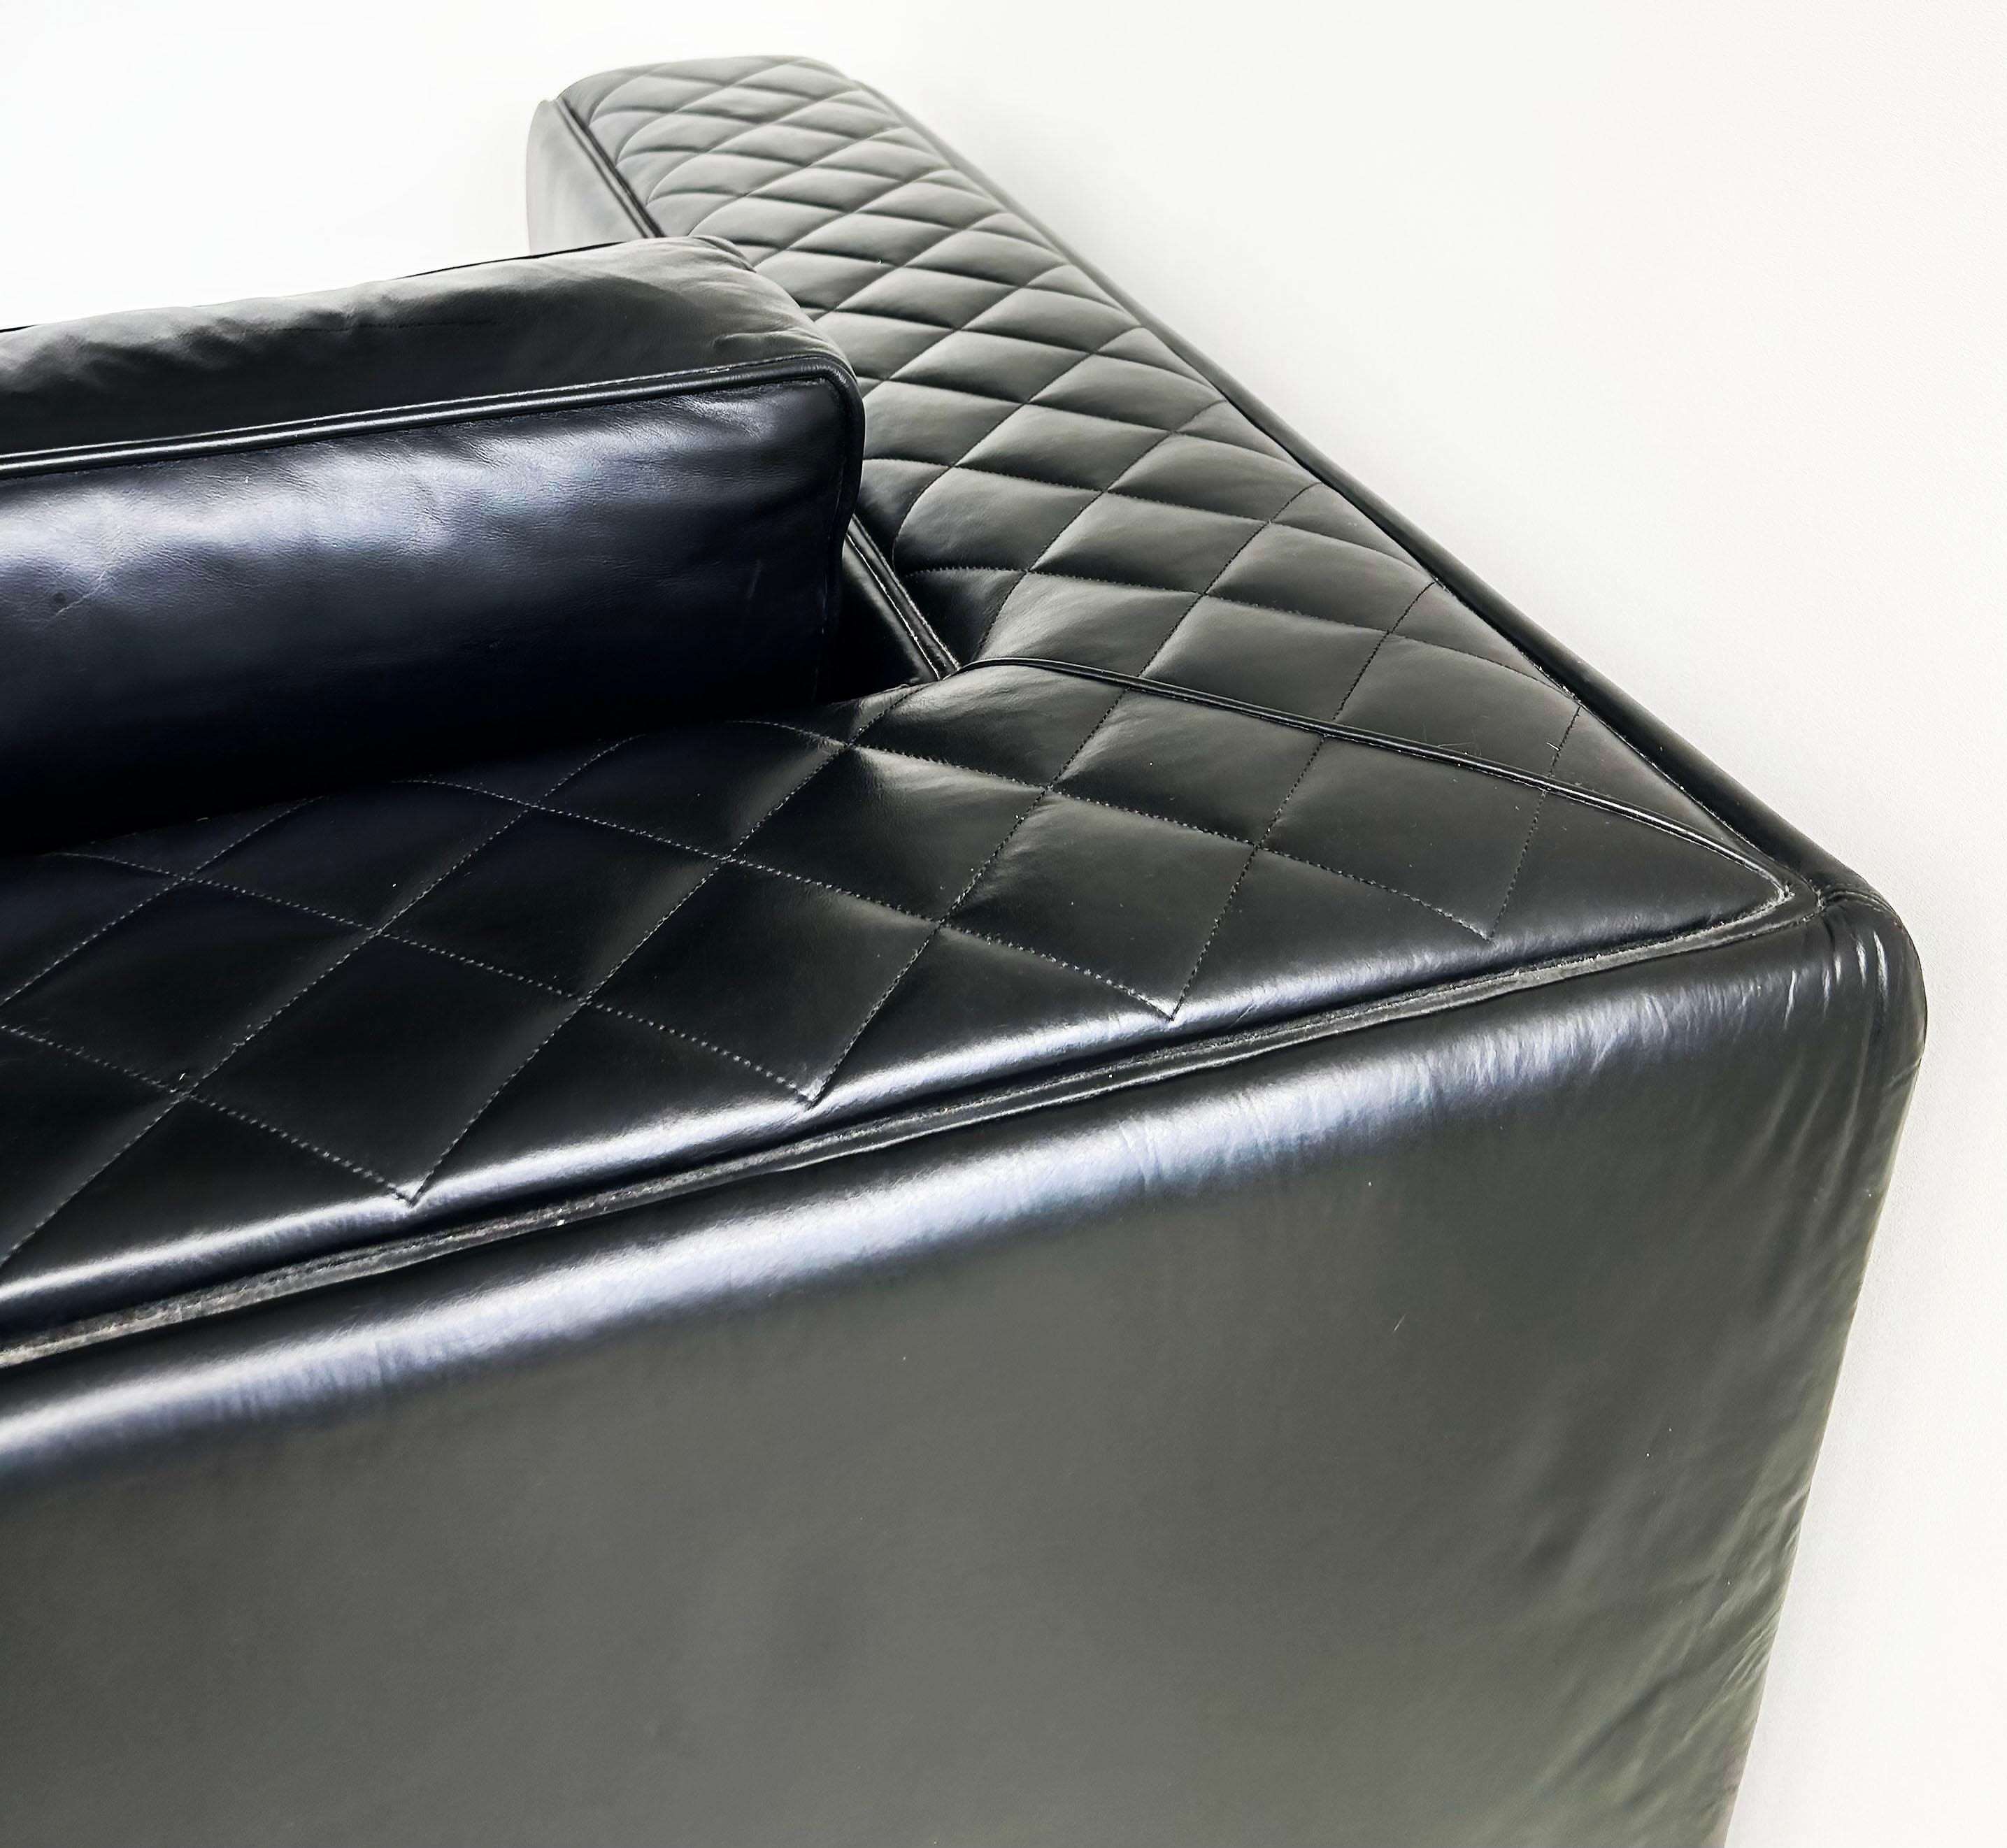  Zanaboni Italy Quilted Black Leather Sofa, Loose Quilted Back and Seat Cushion In Good Condition For Sale In Miami, FL